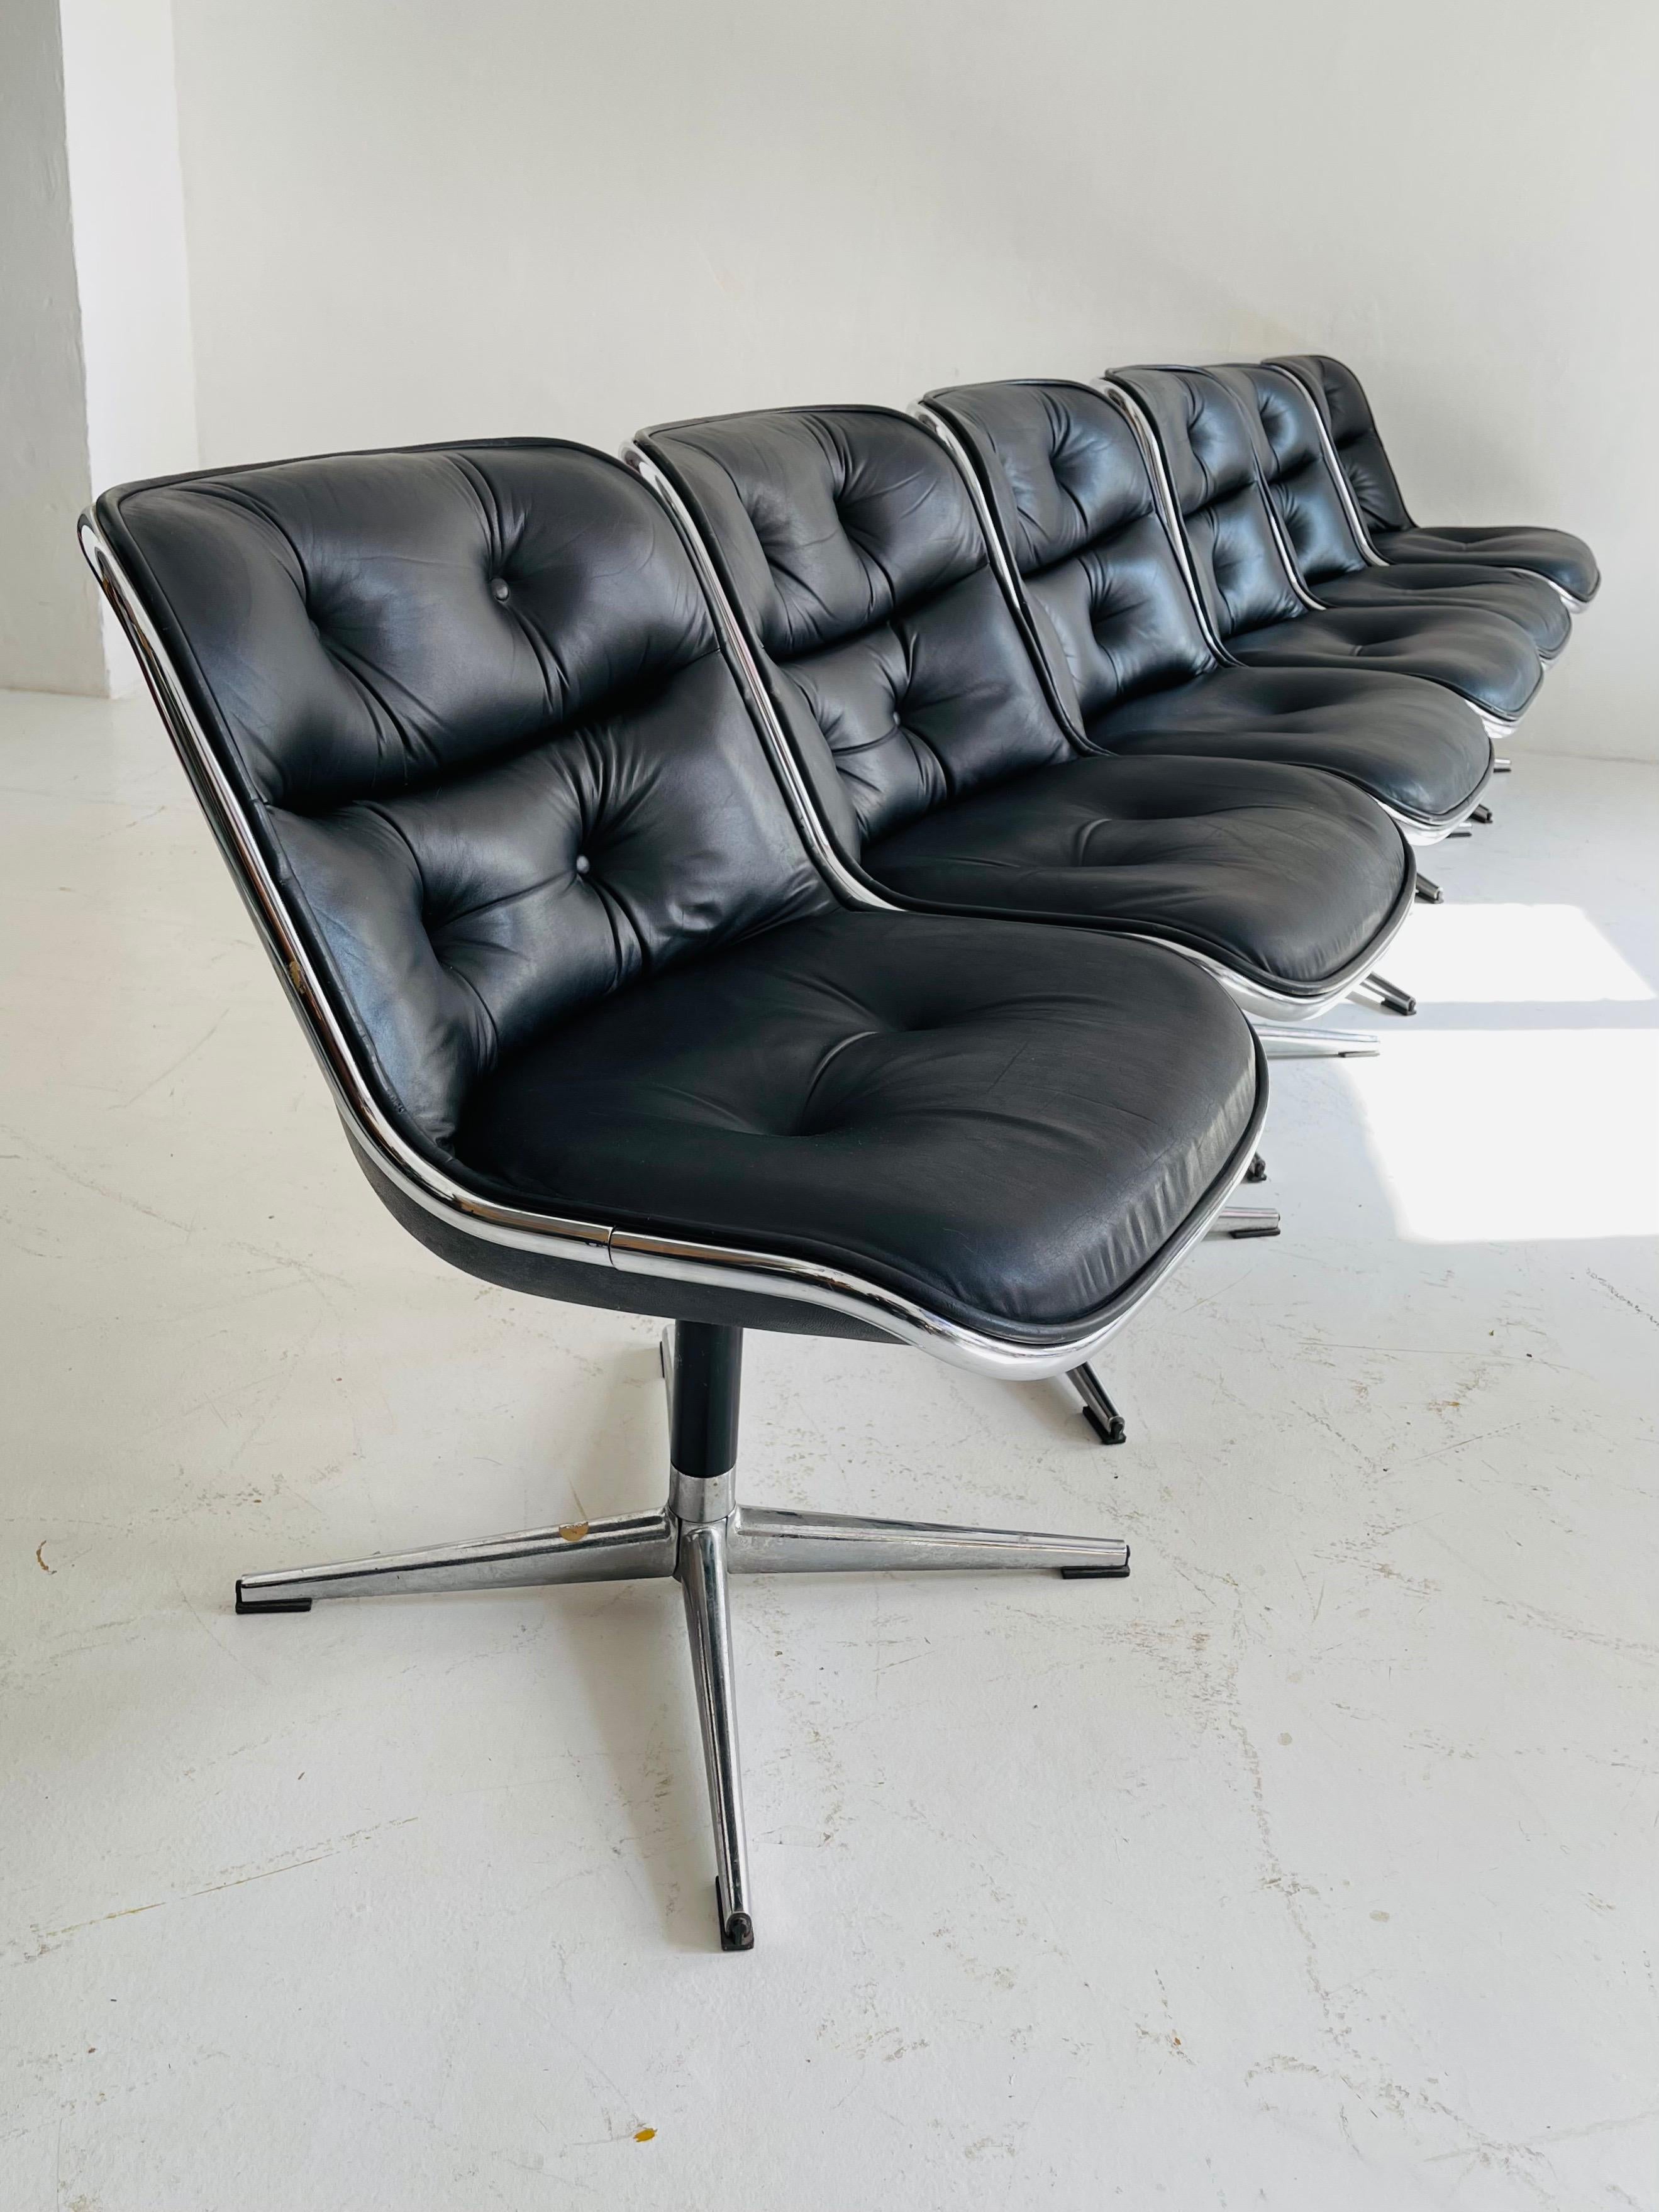 American Pollack Executive Chair by Charles Pollack for Knoll Set of Six Leather, 1960s For Sale